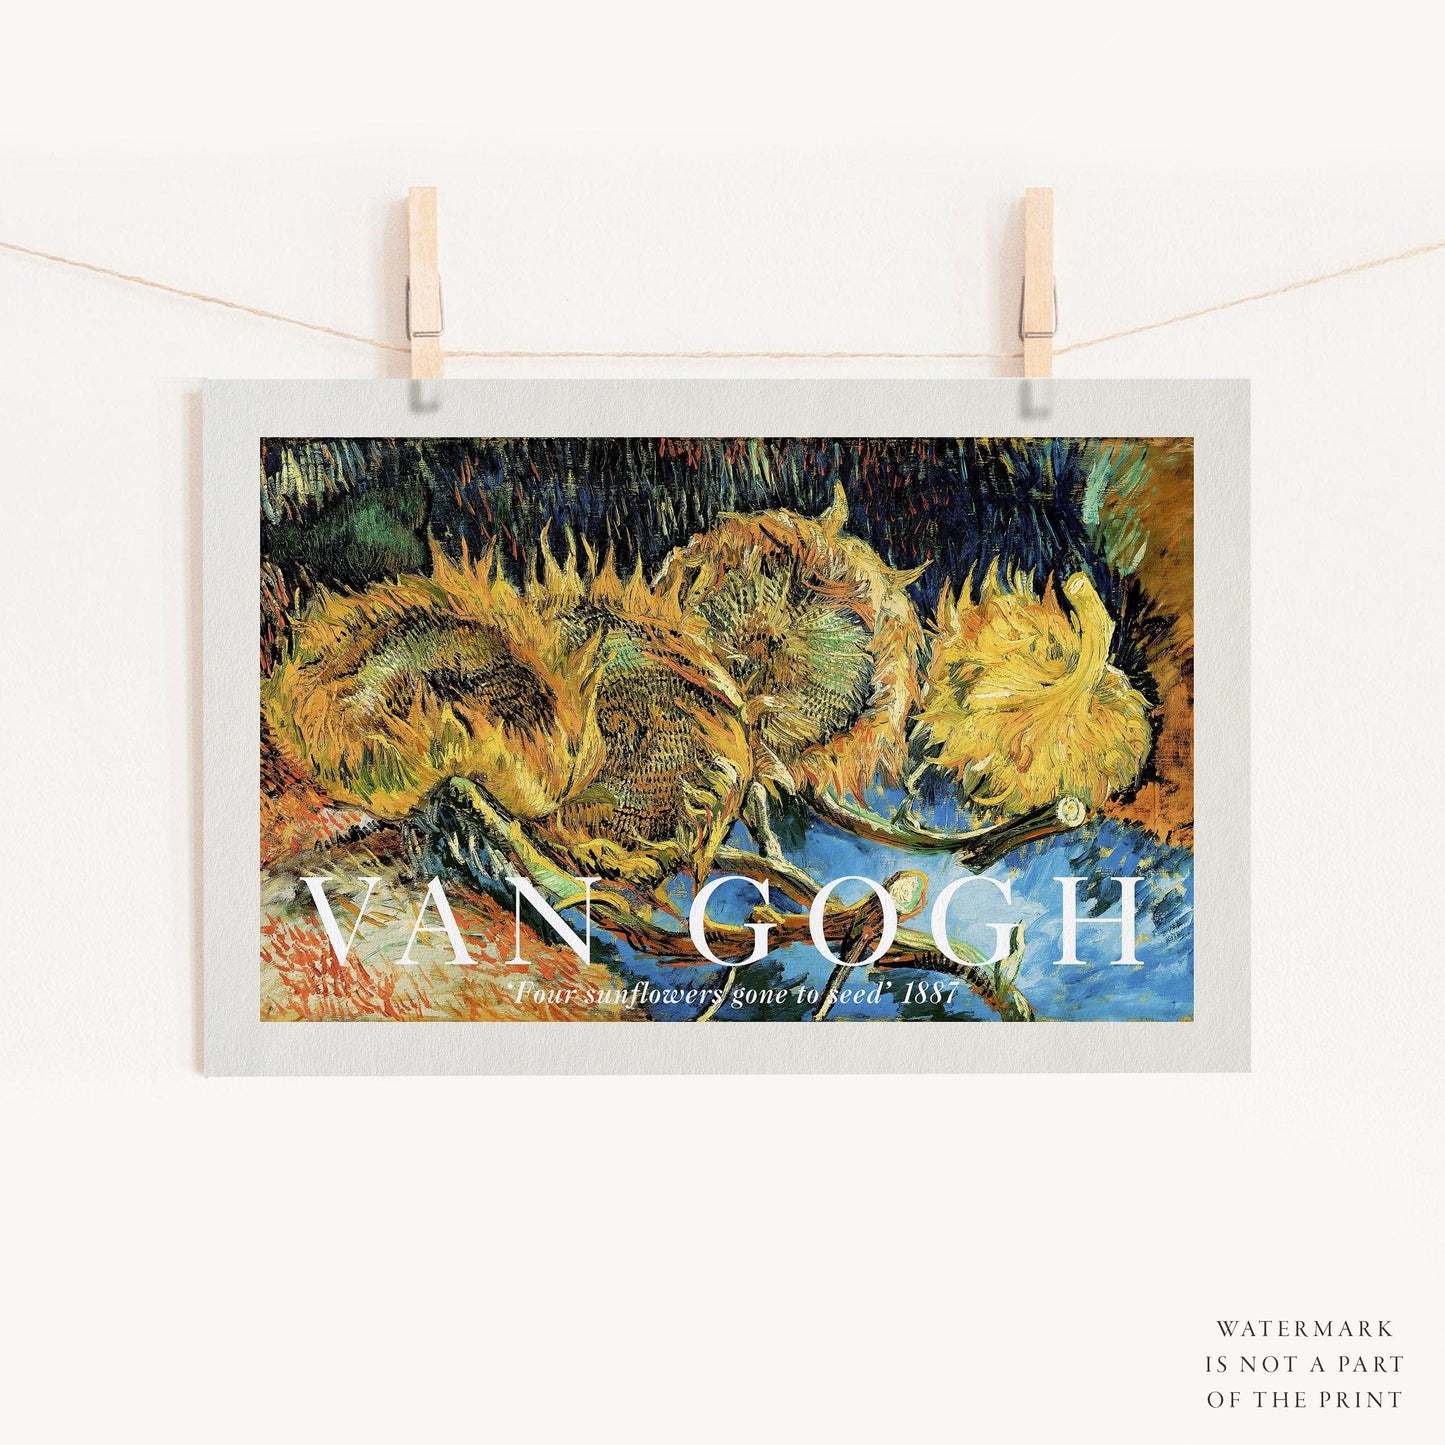 Home Poster Decor Van Gogh Print, Four sunflowers gone to seed, Landscape Art, Impressionist painter, Wedding Gift, Bedroom Wall Decor, Van Gogh Reproduction